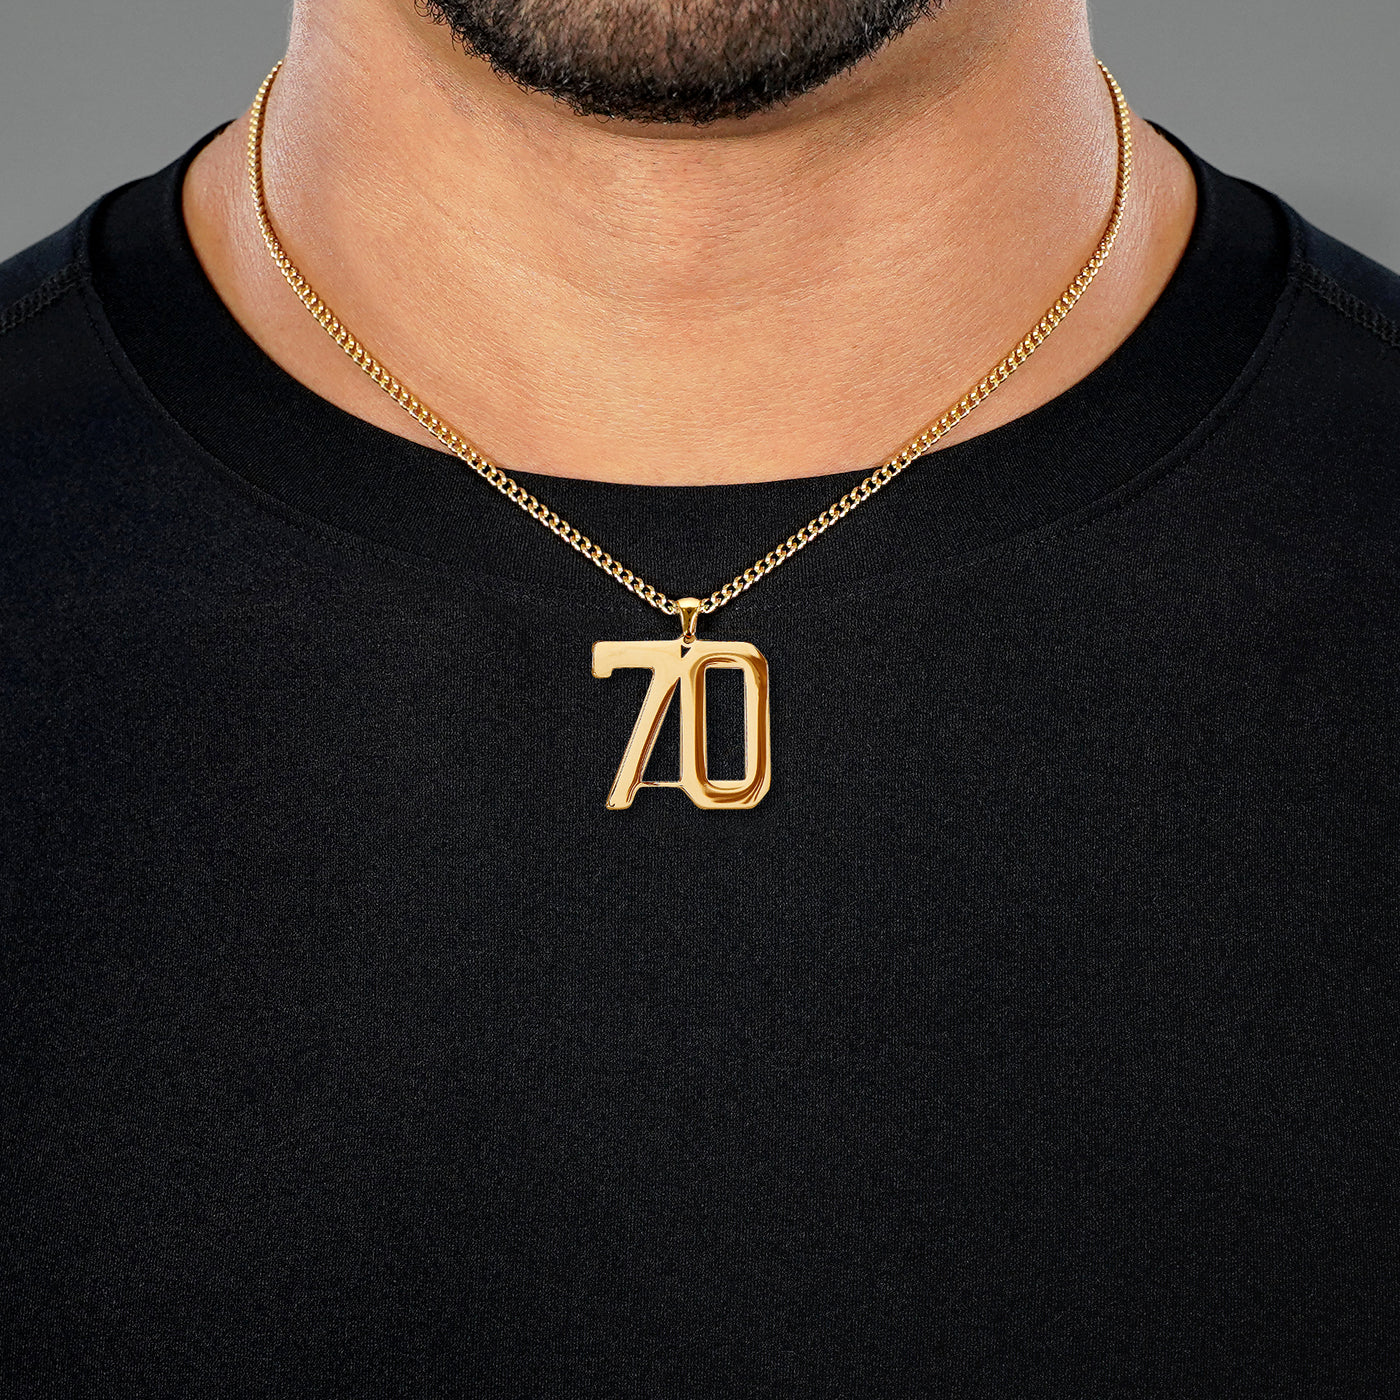 70 Number Pendant with Chain Necklace - Gold Plated Stainless Steel